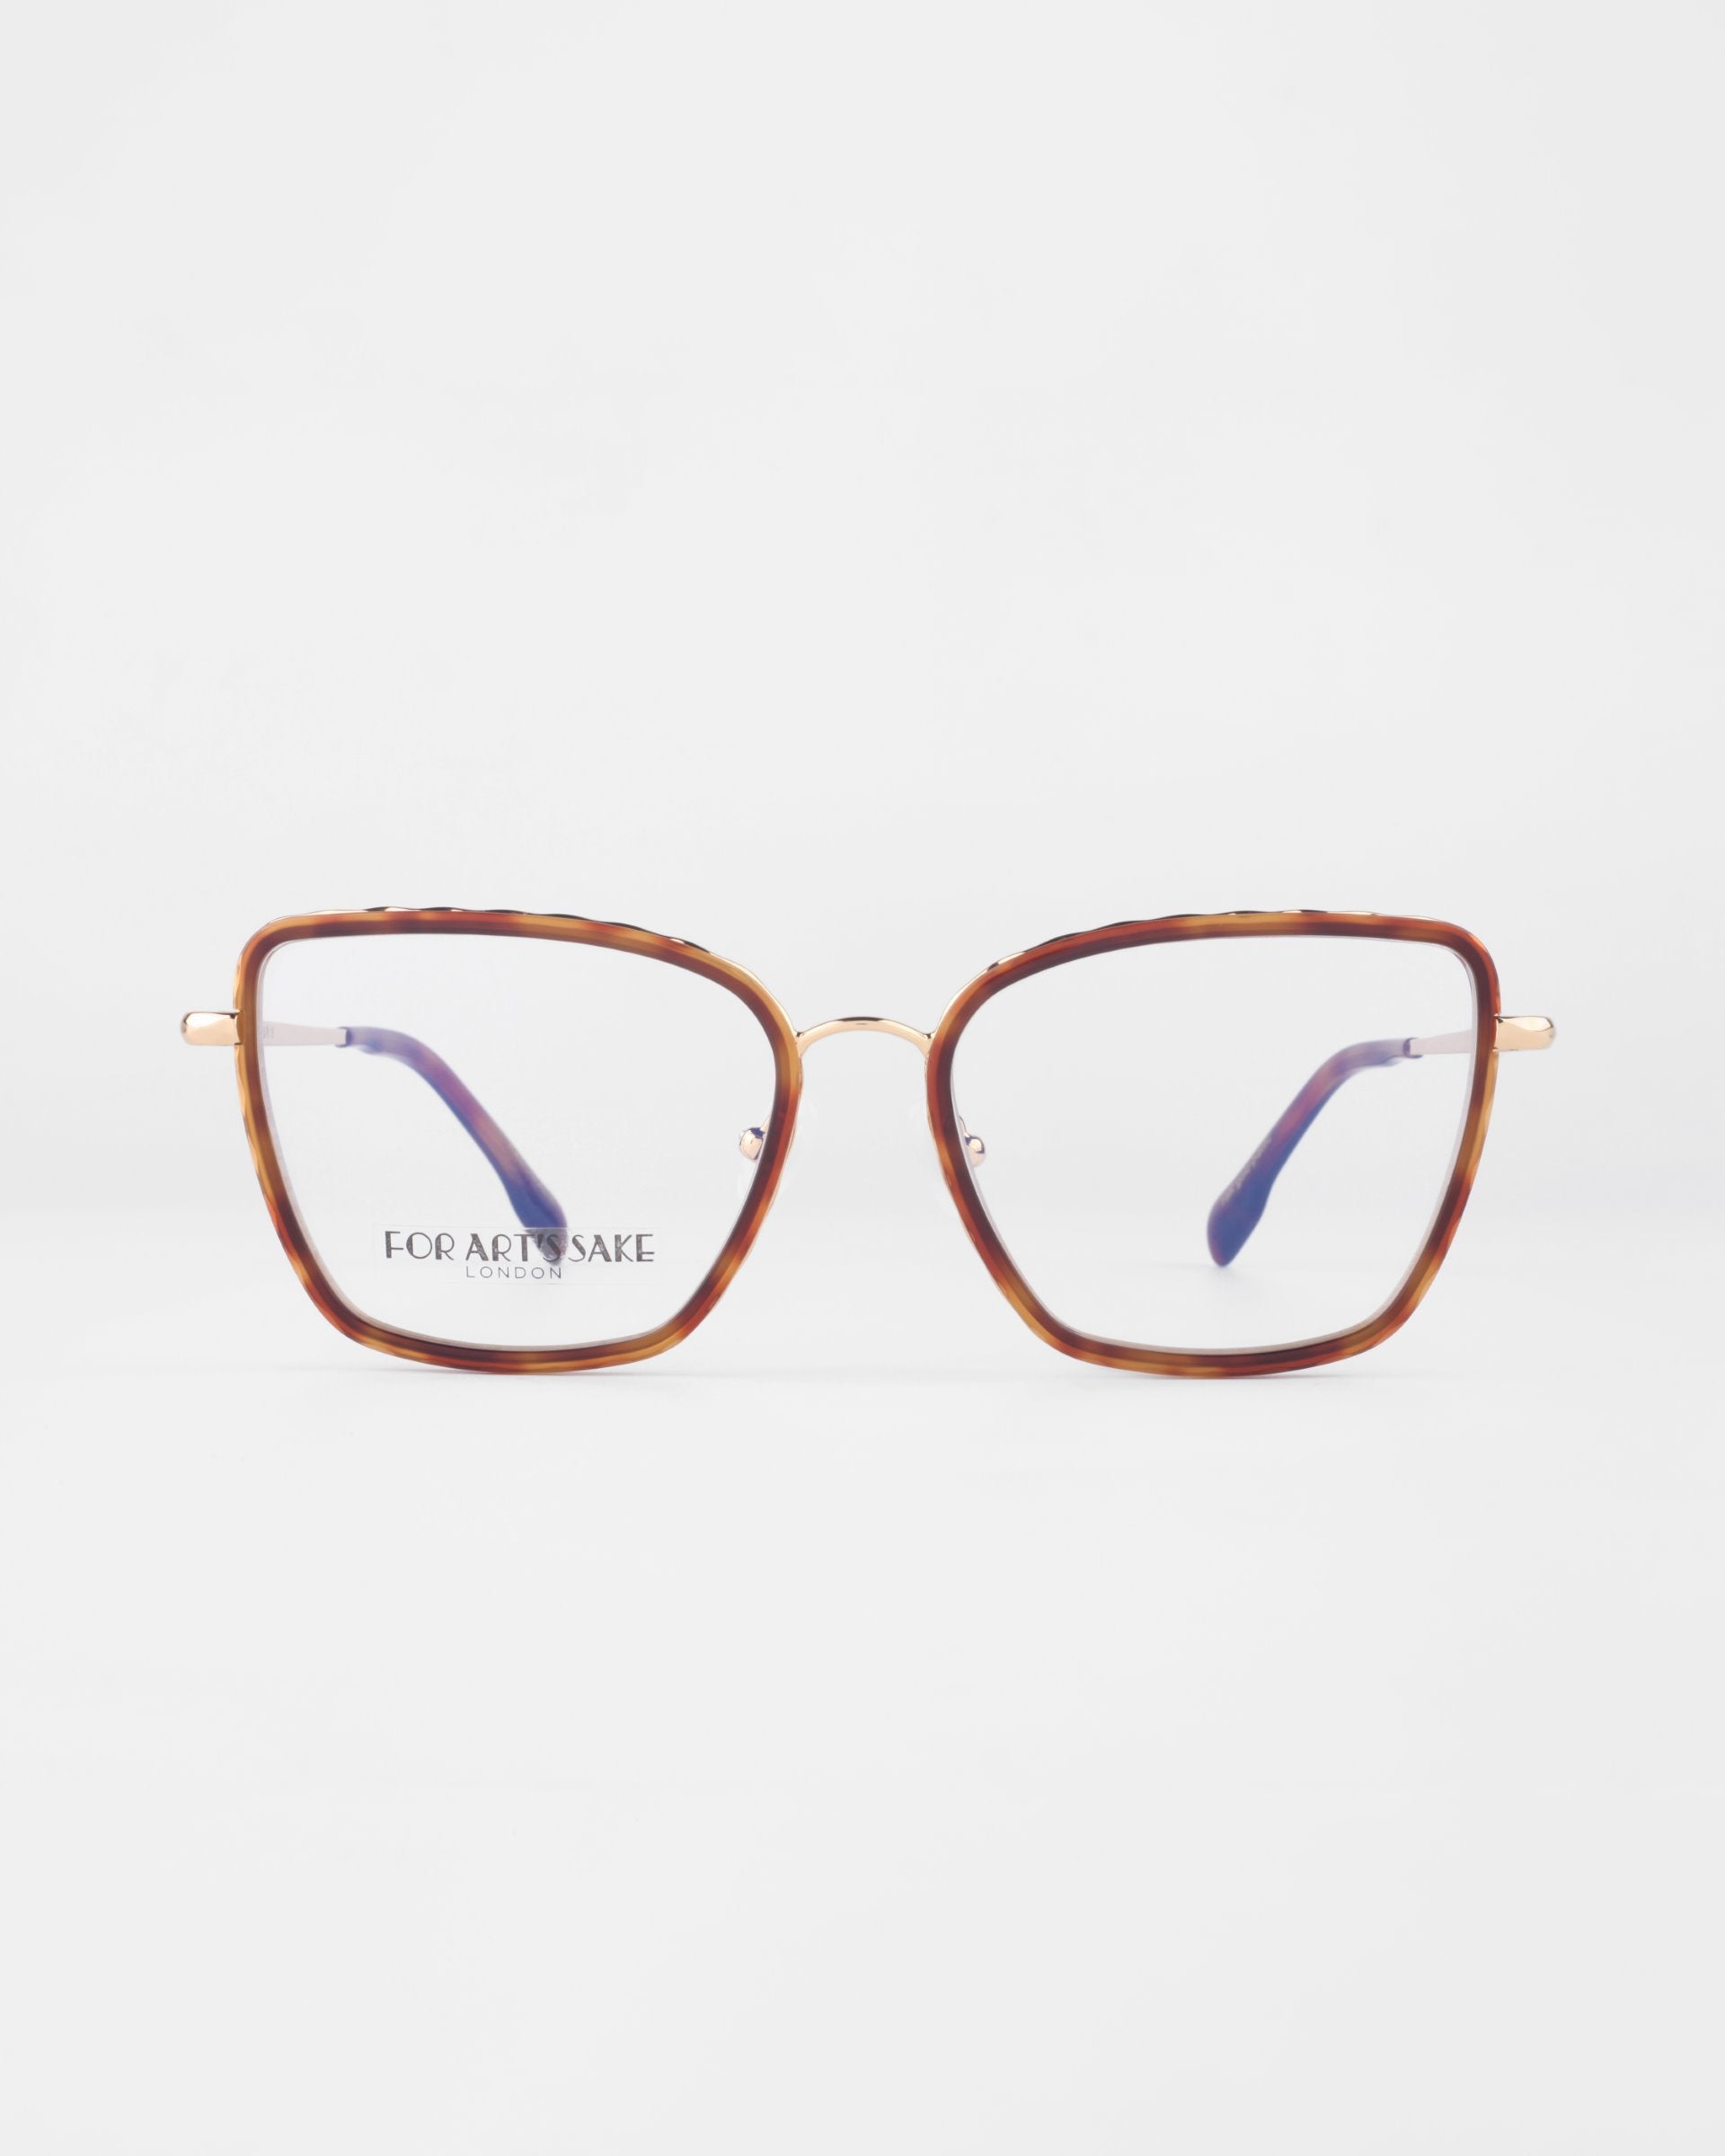 A pair of brown, large, square-rimmed glasses with gold-colored arms and purple inner tips. The transparent lenses showcase the brand text &quot;For Art&#39;s Sake®&quot; on the left lens. Featuring 18-karat gold-plated frames, the Lace glasses are positioned against a plain white background.